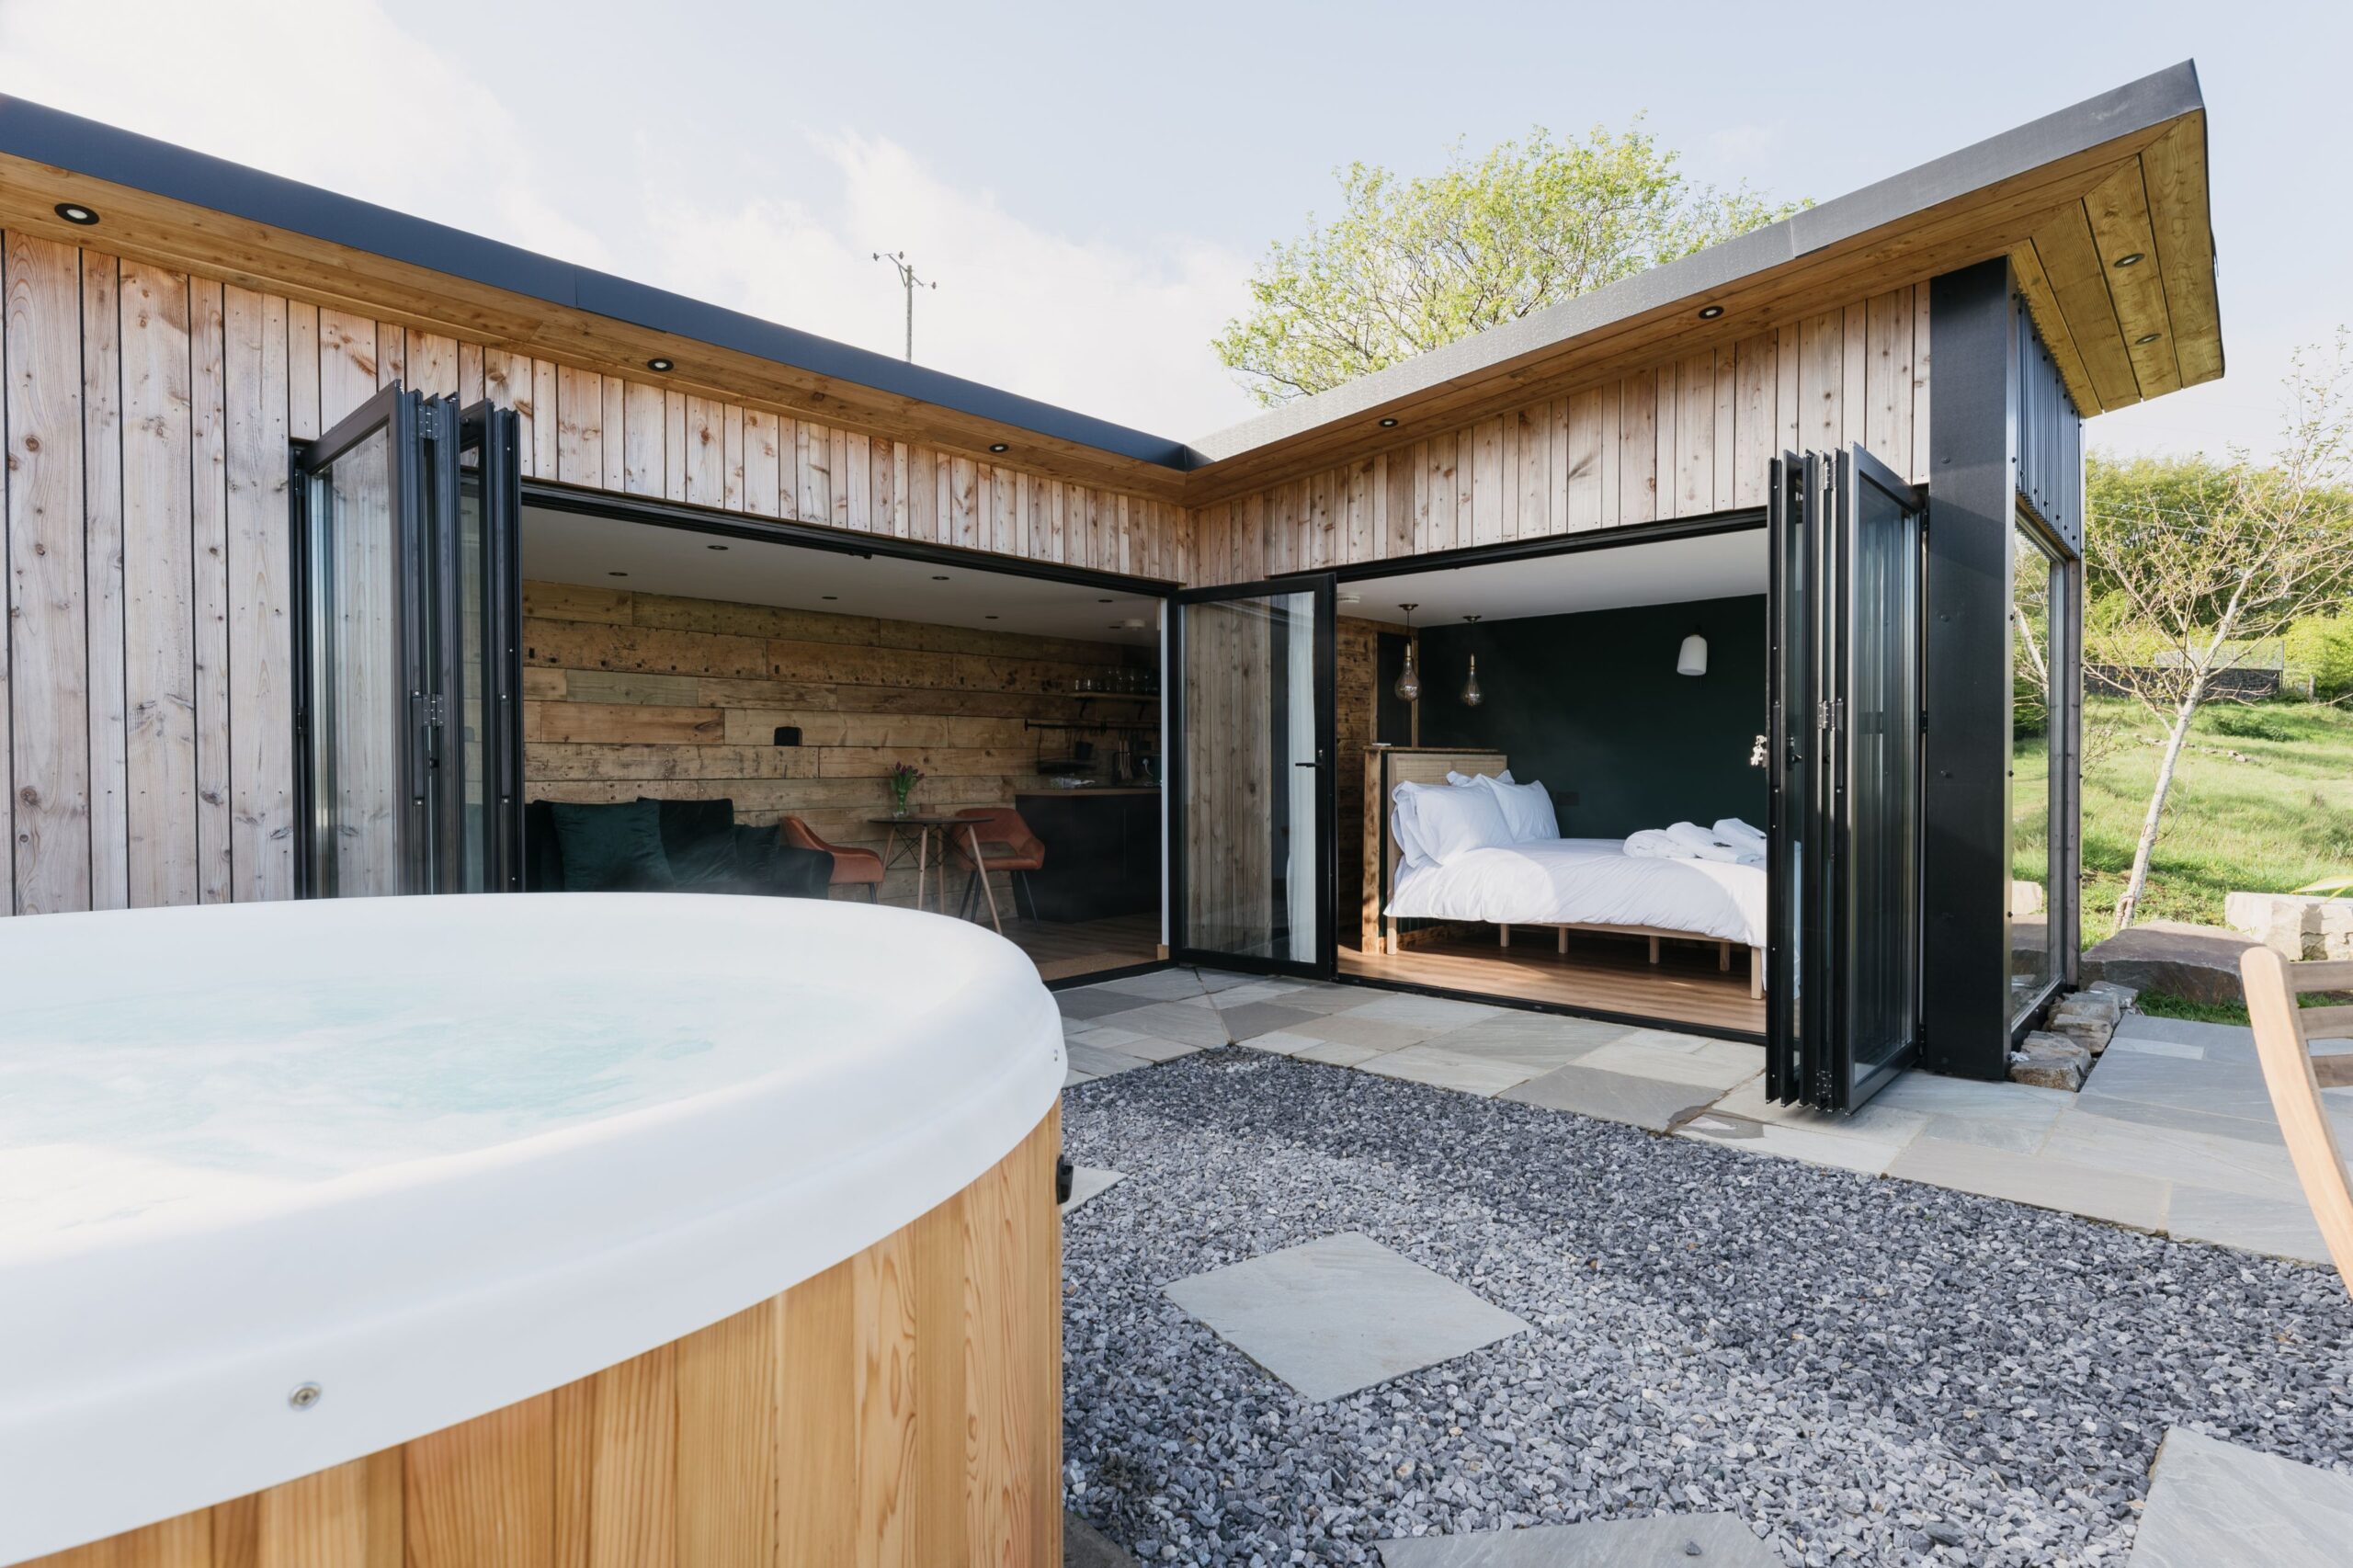 A wooden hot tub outside of a house